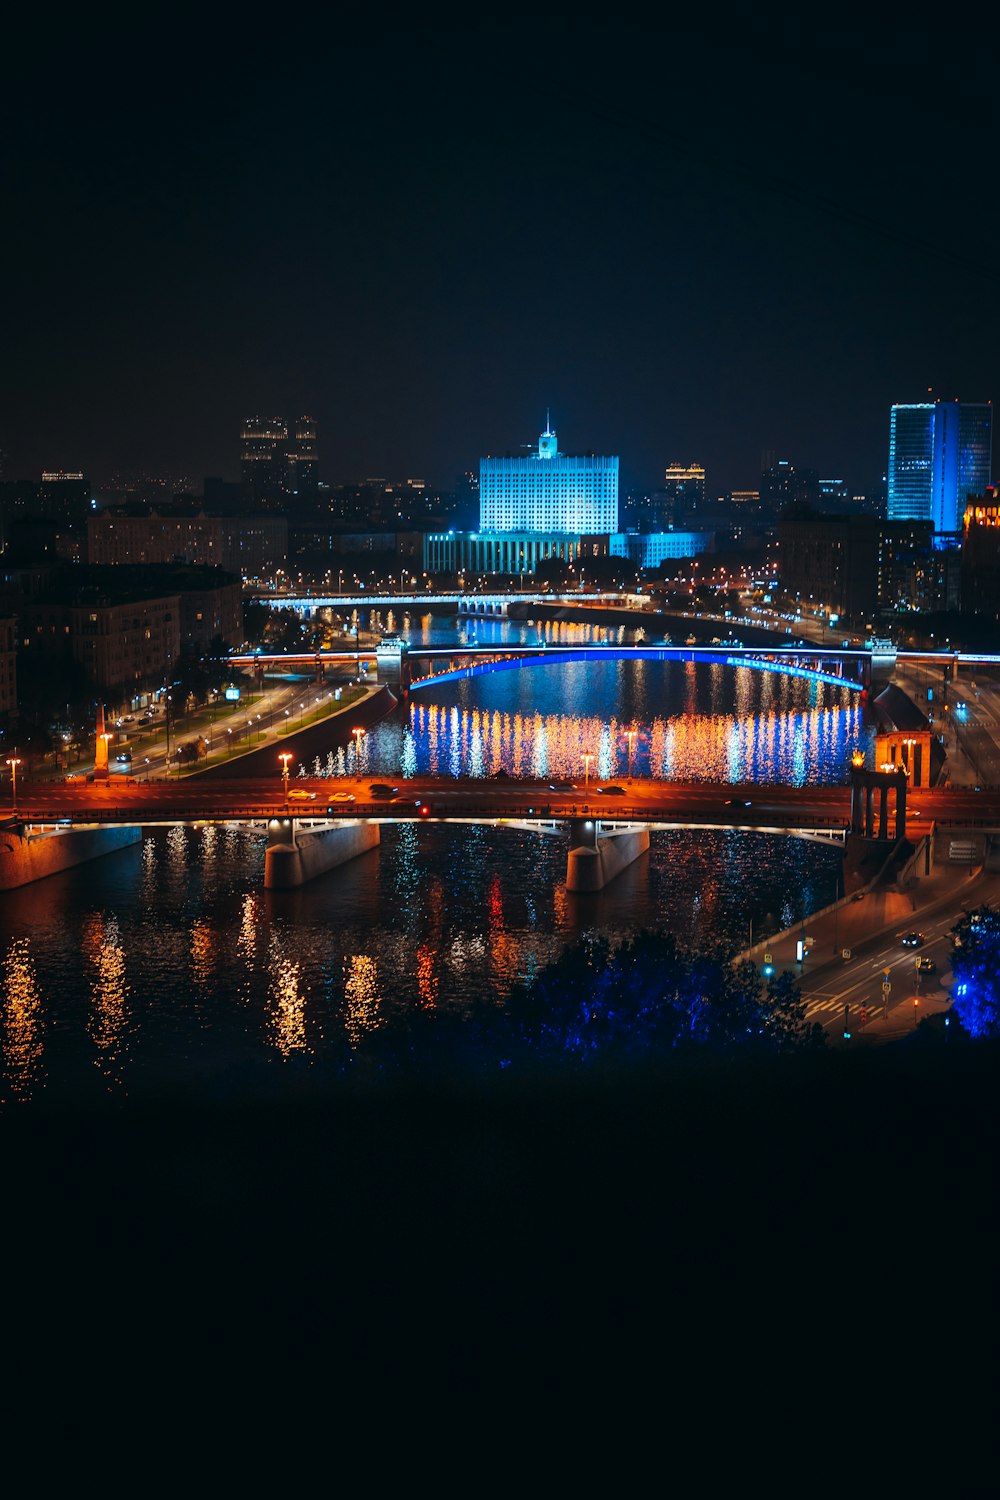 a view of a city at night from across the river